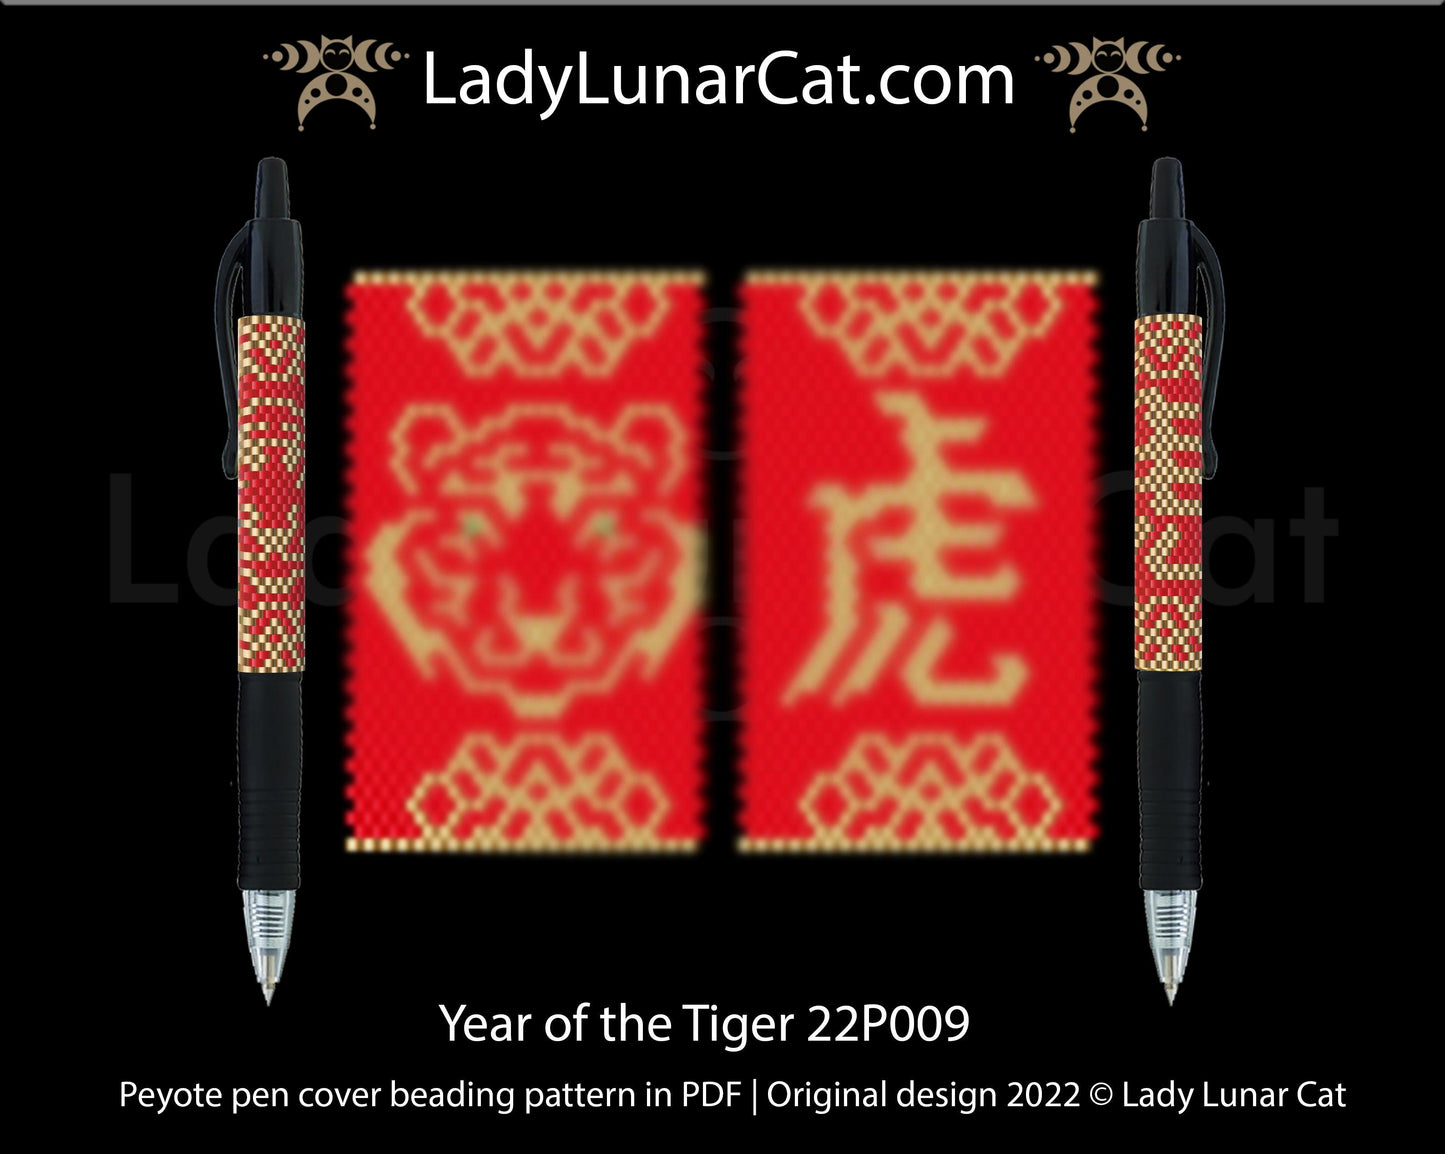 Peyote pen cover pattern for beading Year of the Tiger 22P009 LadyLunarCat